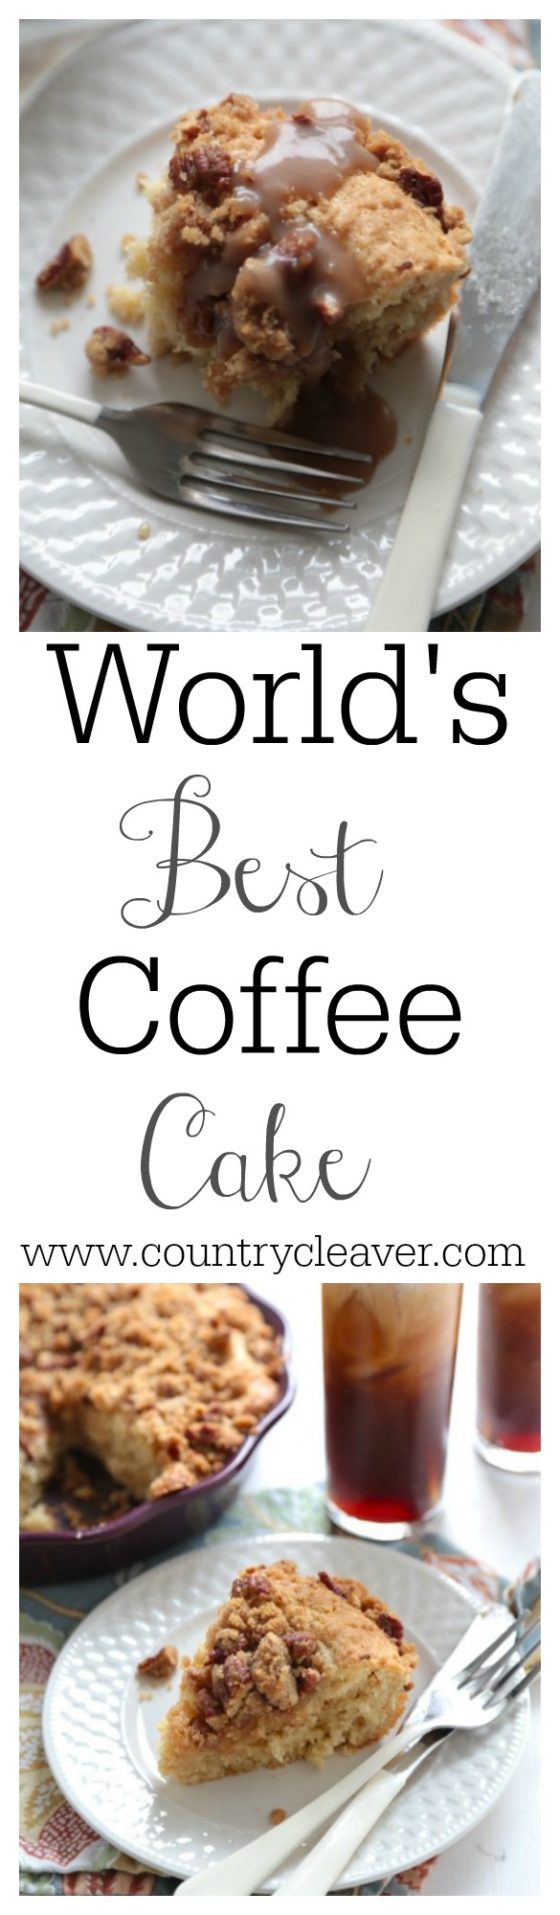 World's Best Coffee Cake-- www.countrycleaver.com